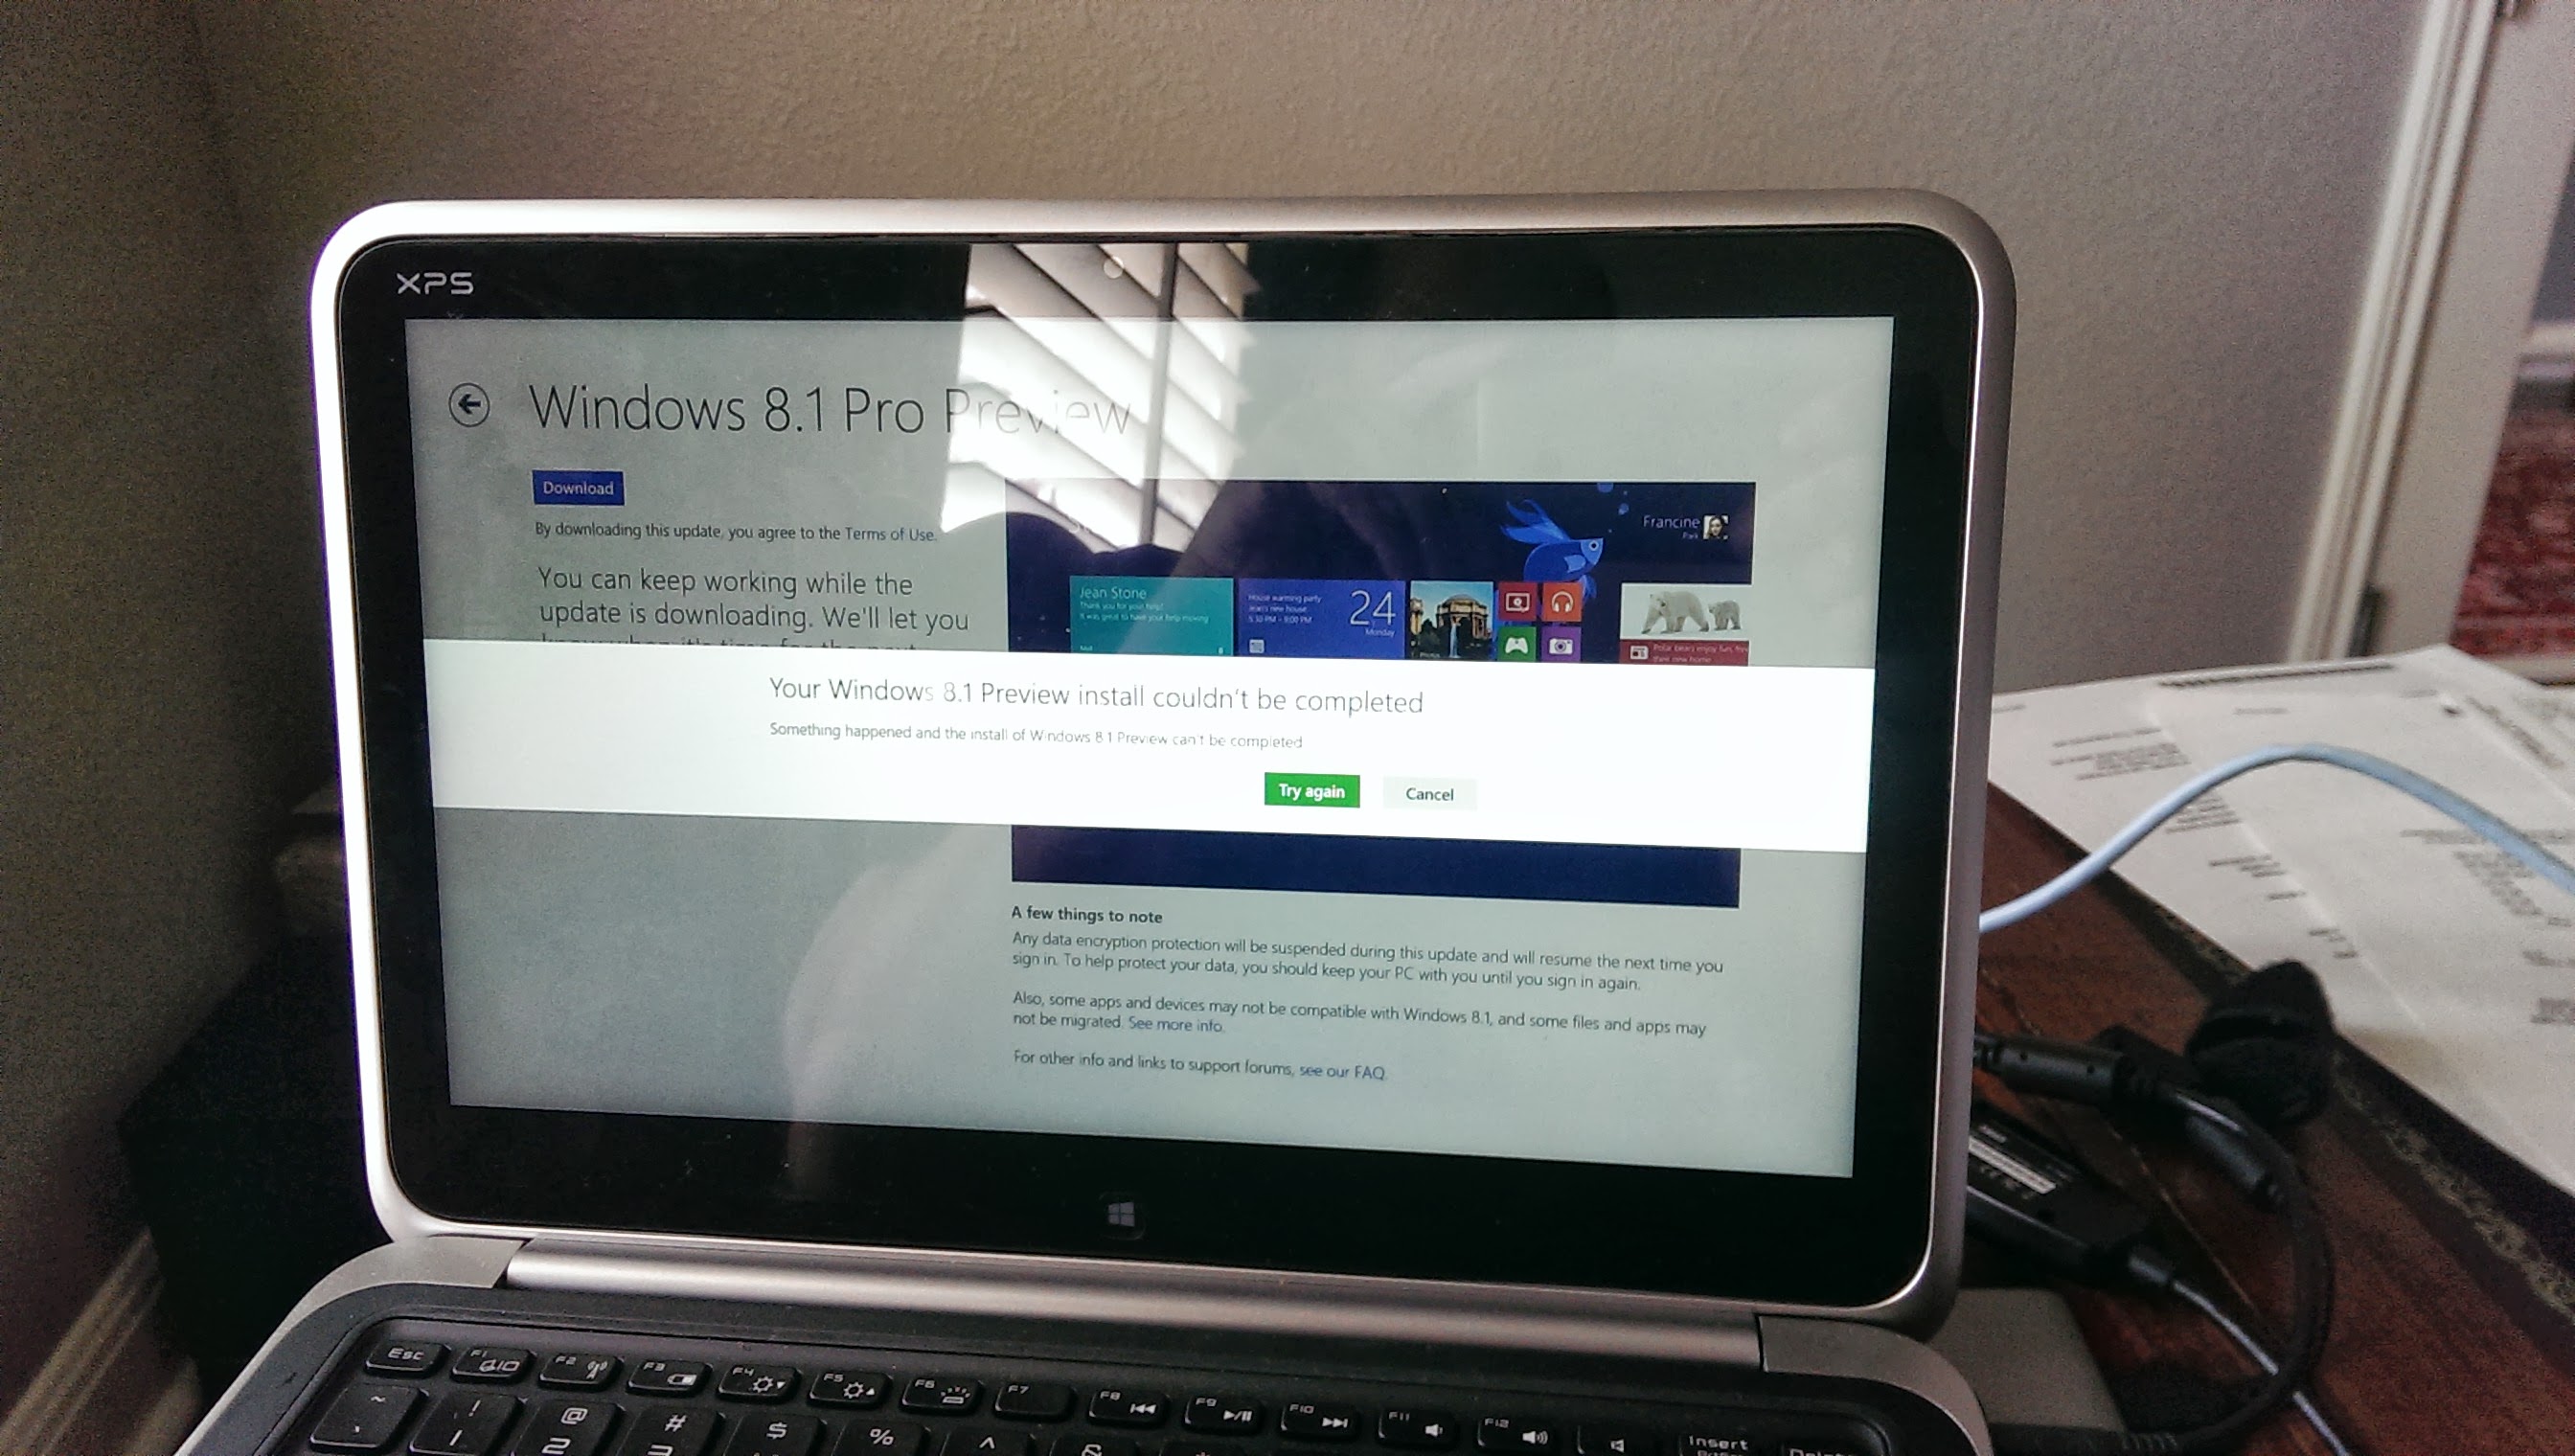 What to be Aware of Installing Windows 8.1 Preview